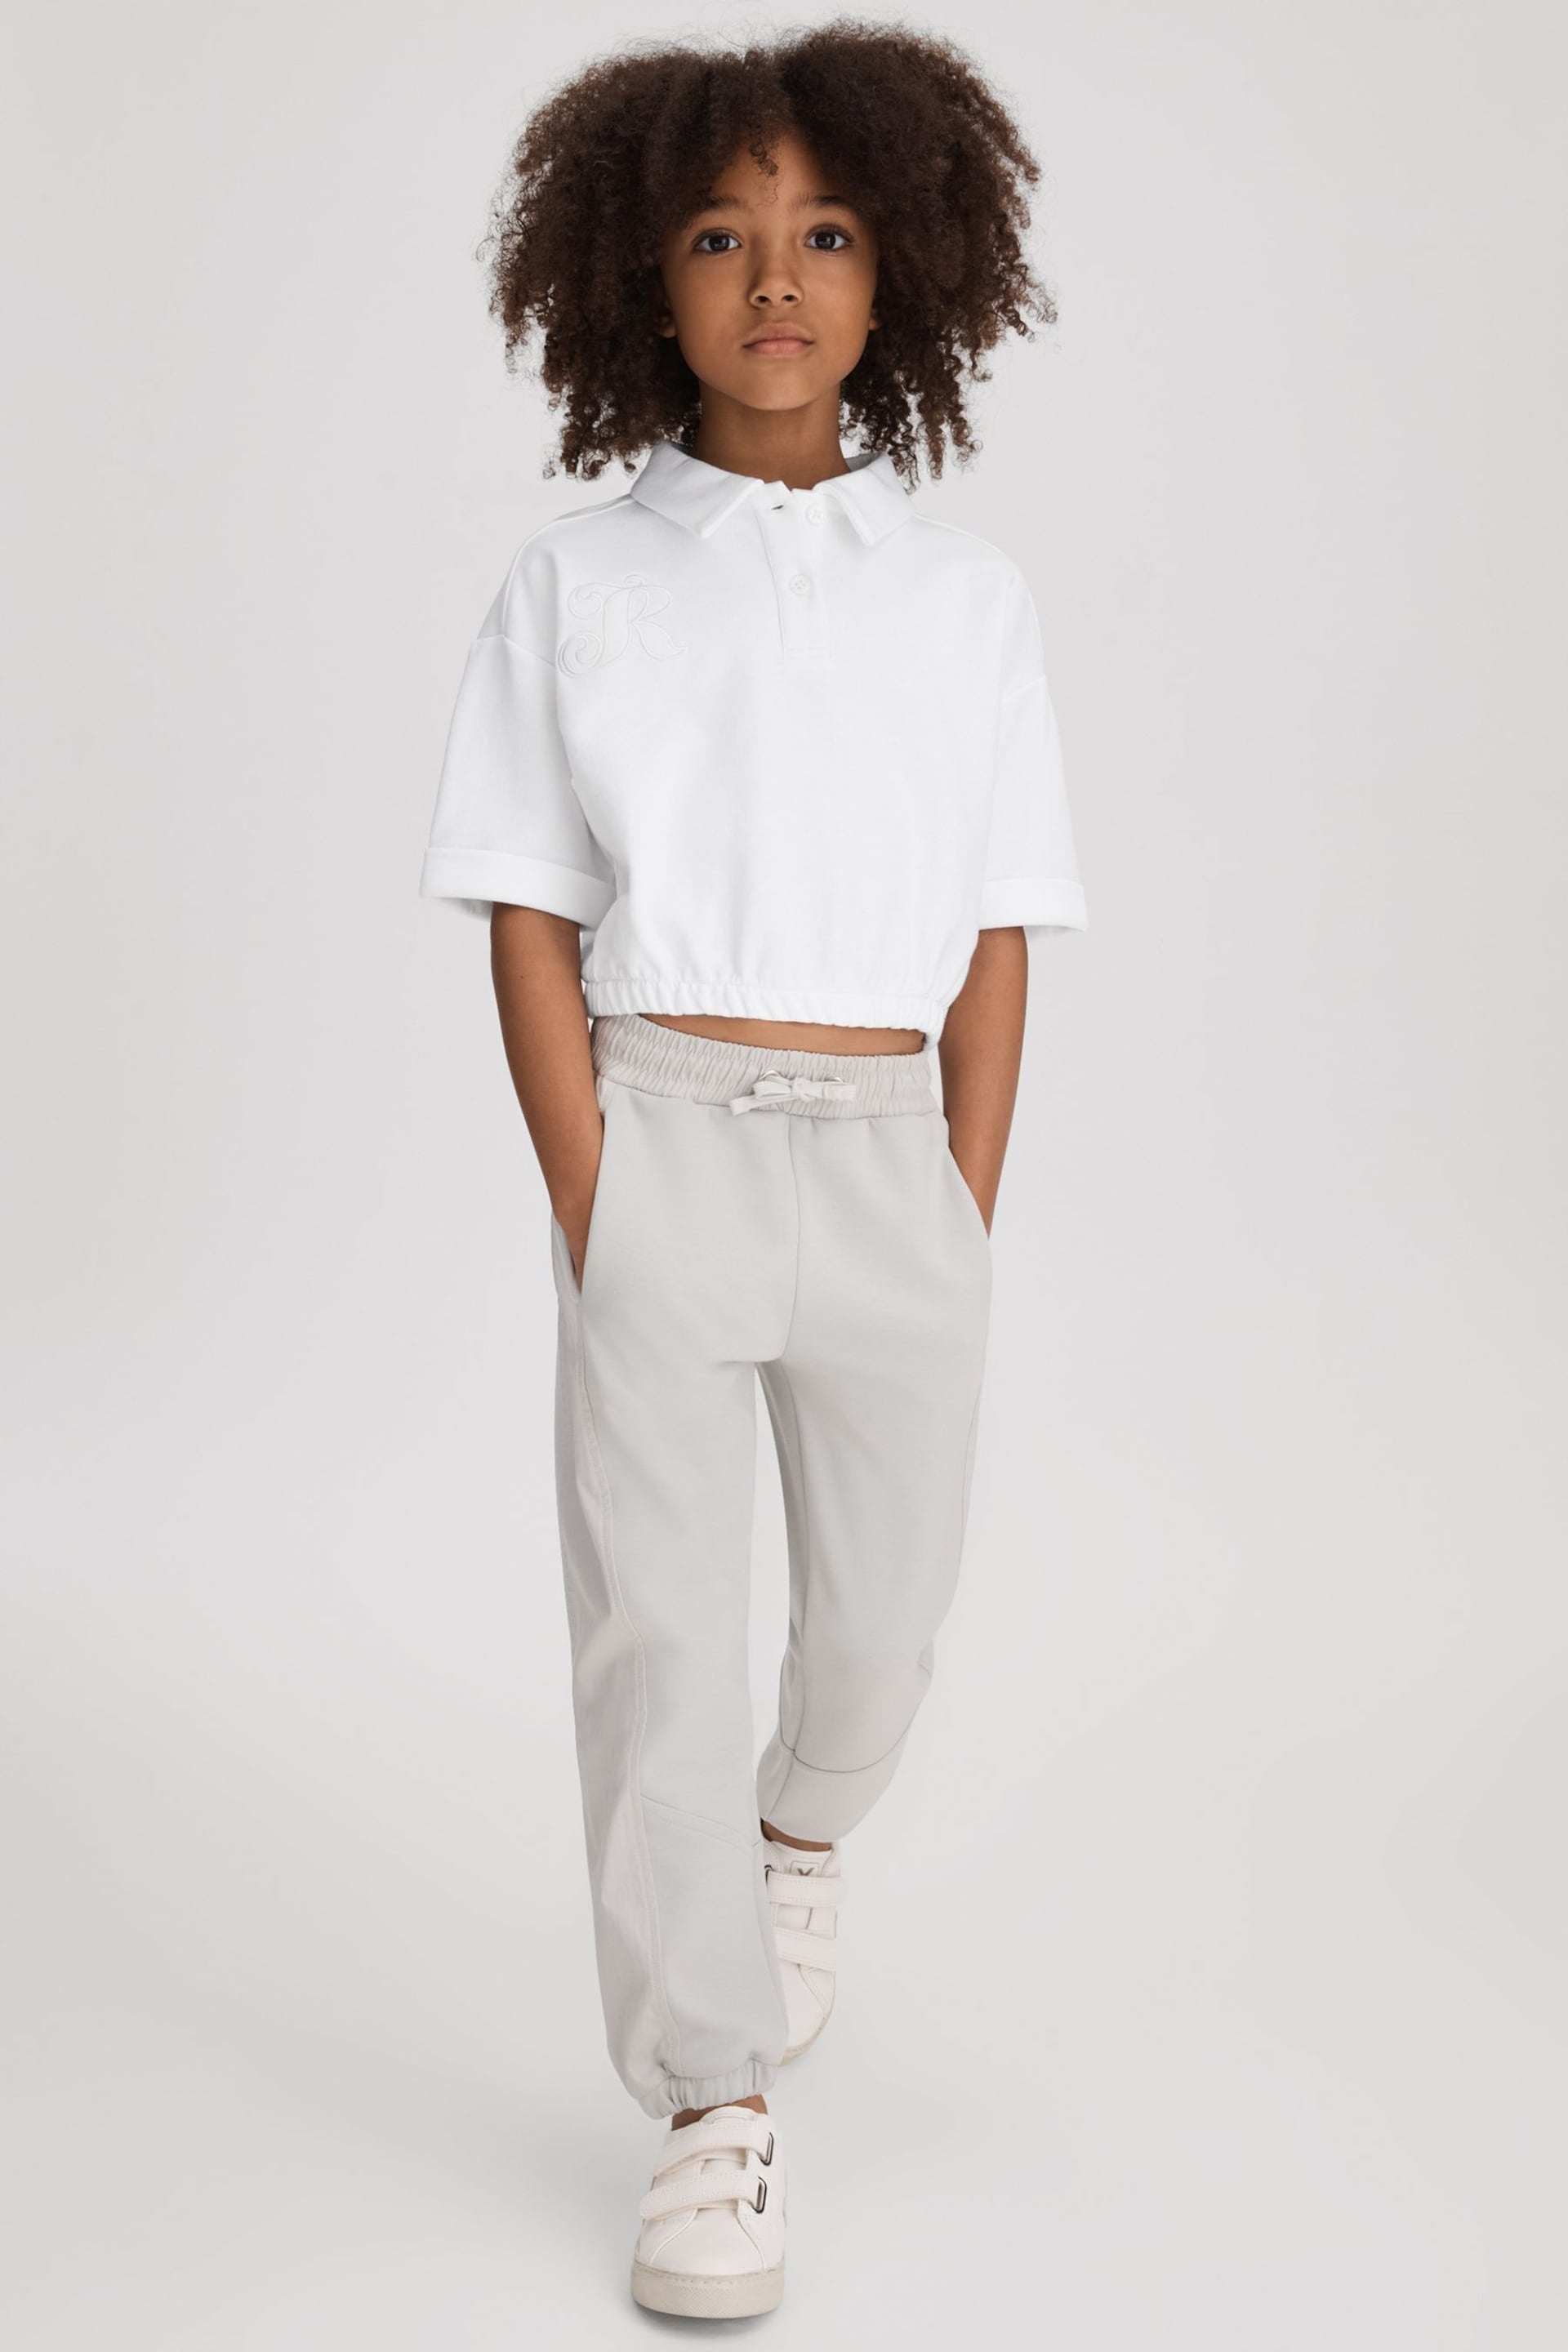 Reiss Ivory Pax Teen Cotton Cropped Polo Shirt - Image 2 of 4